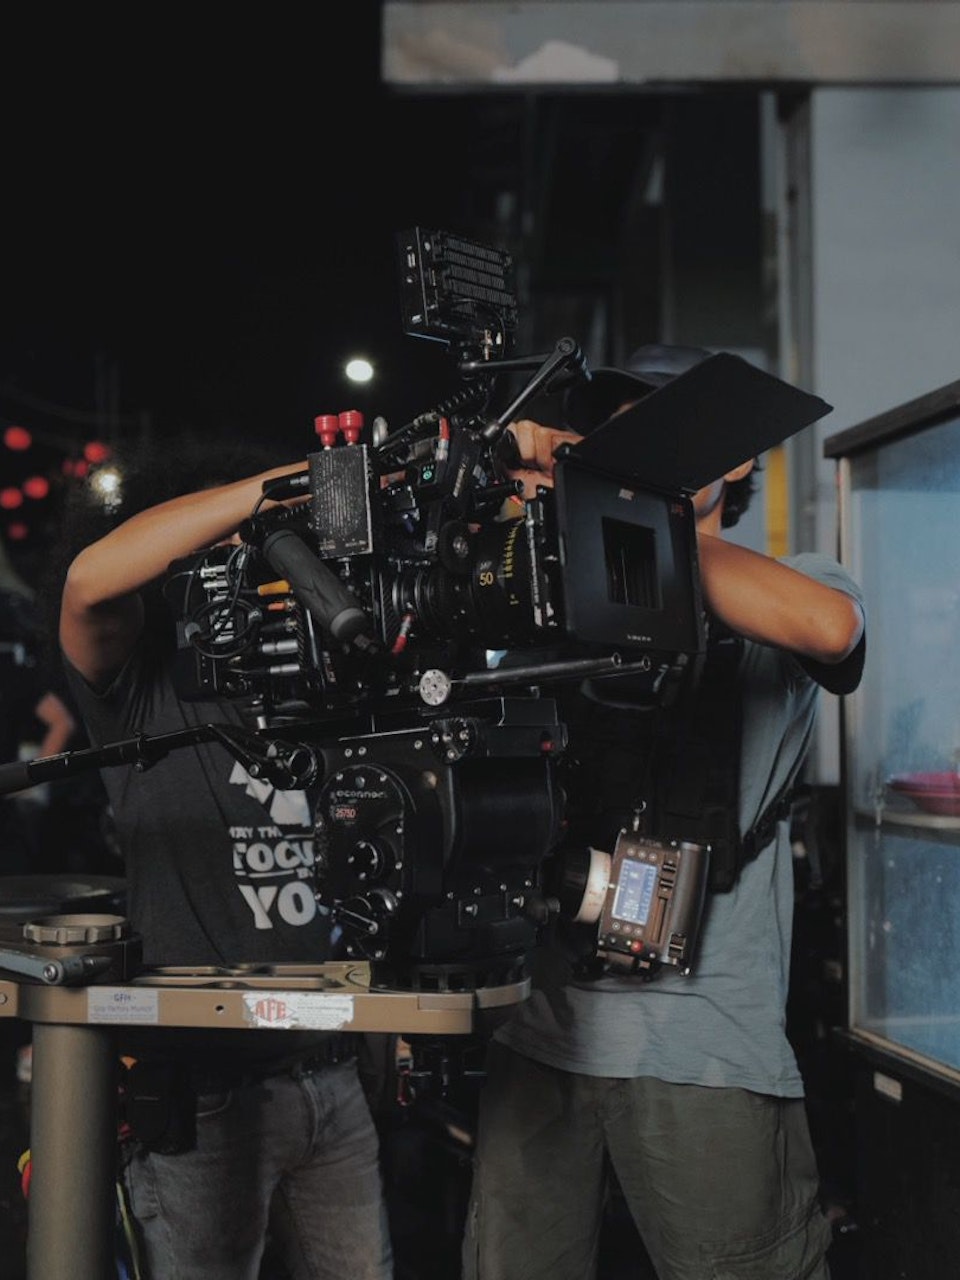 electriclime° - On set | electriclime° battles through thunder and rain in Kuala Lumpur to produce films for Diablo Immortal